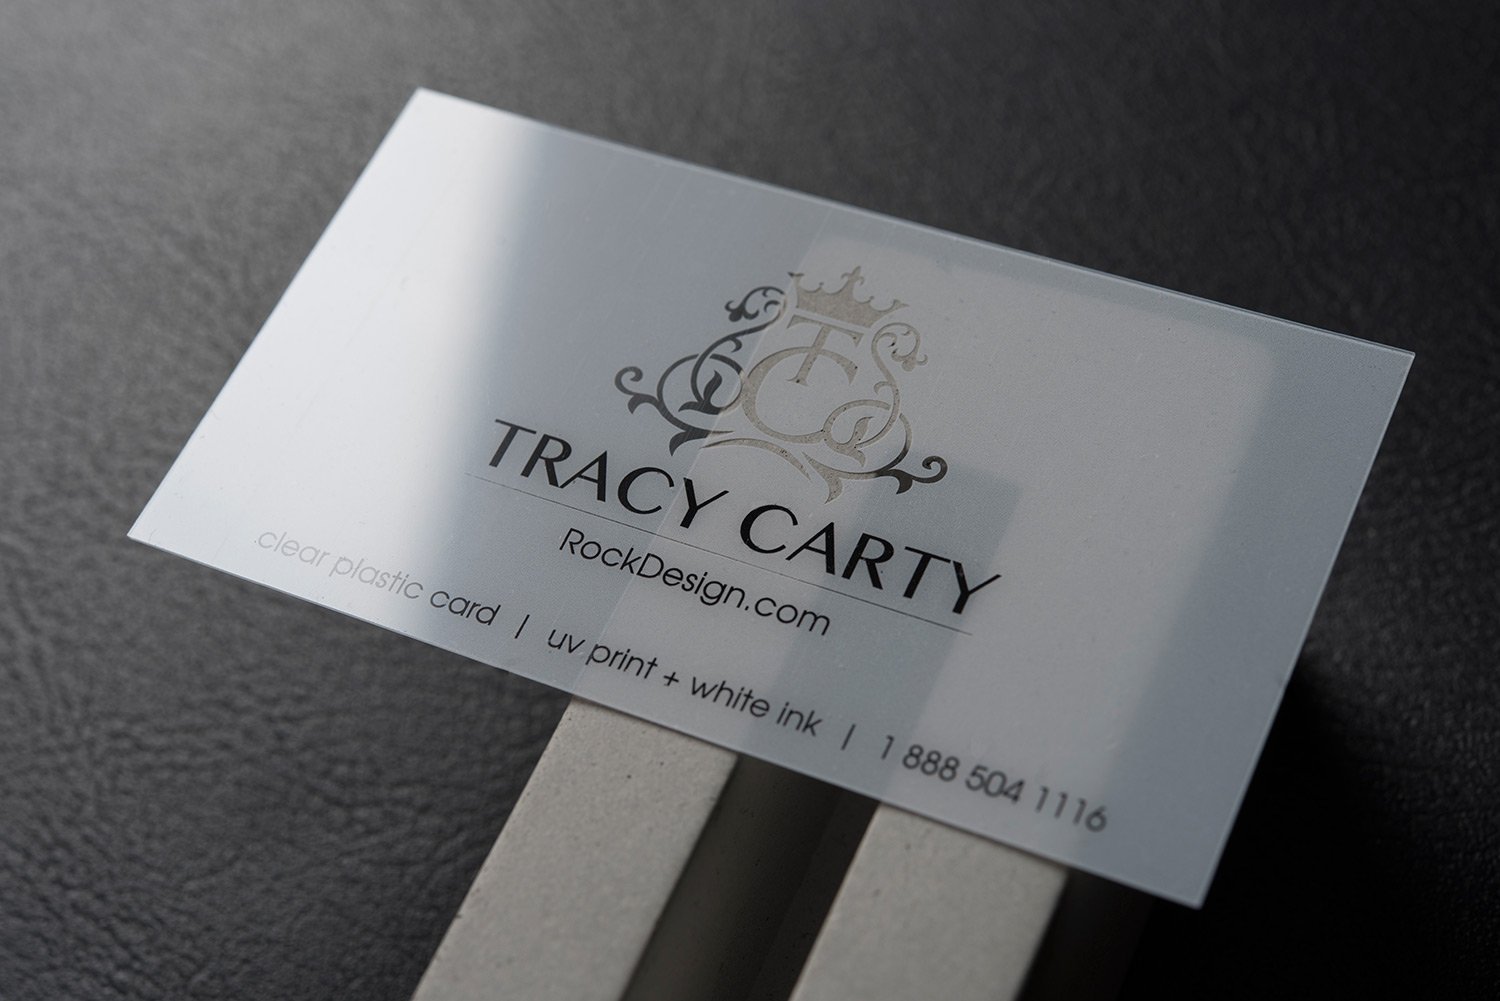 Elegant transparent plastic name card design – Tracy Carty Throughout Transparent Business Cards Template